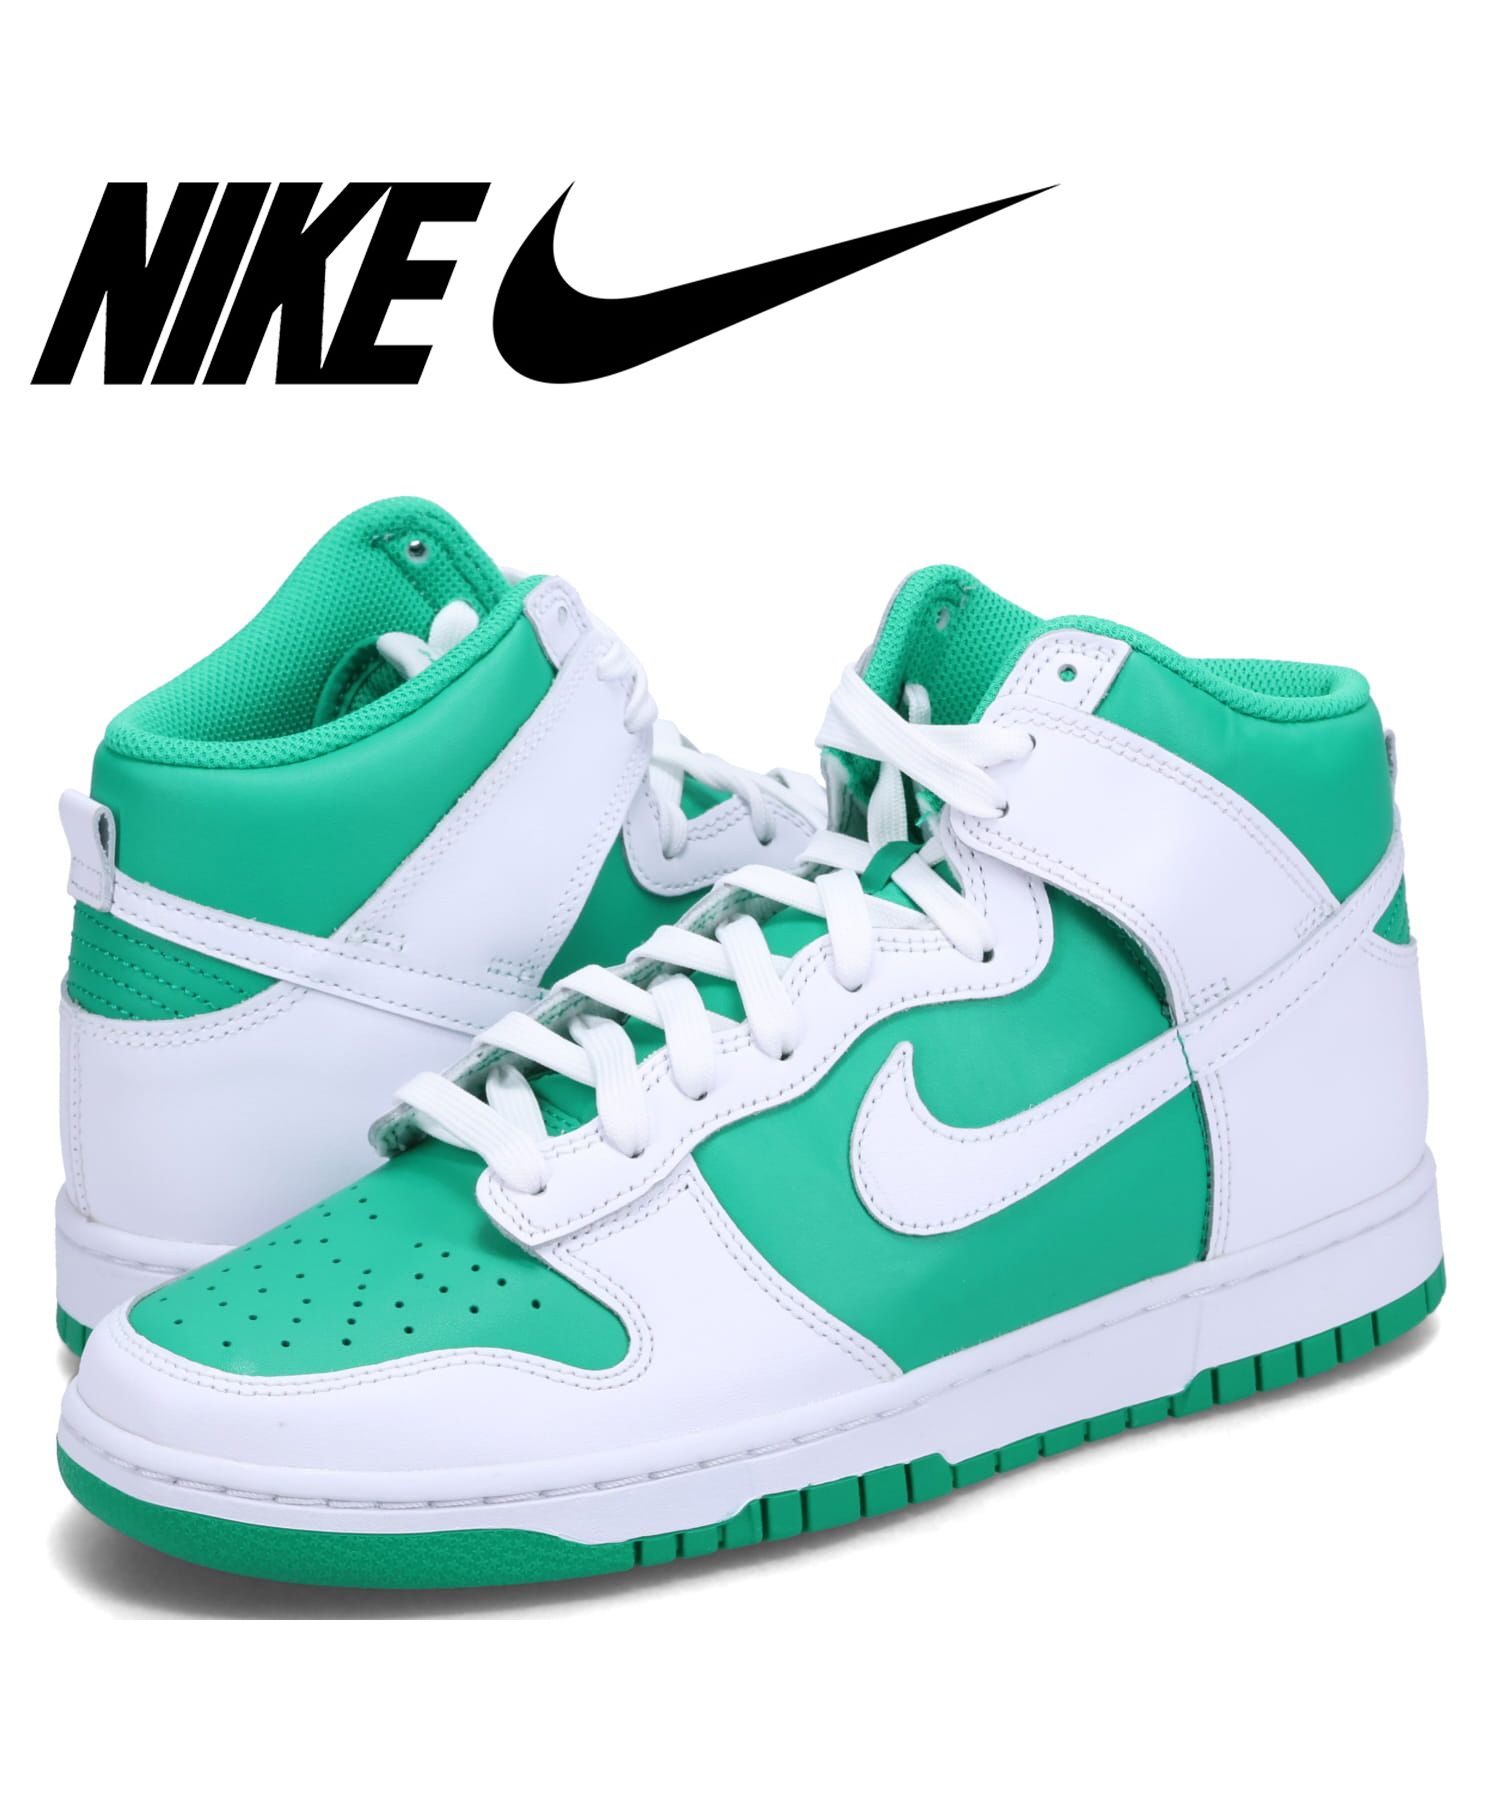 NIKE DUNK HIGH RETRO Be True To Your School ナイキ ダンク ハイ